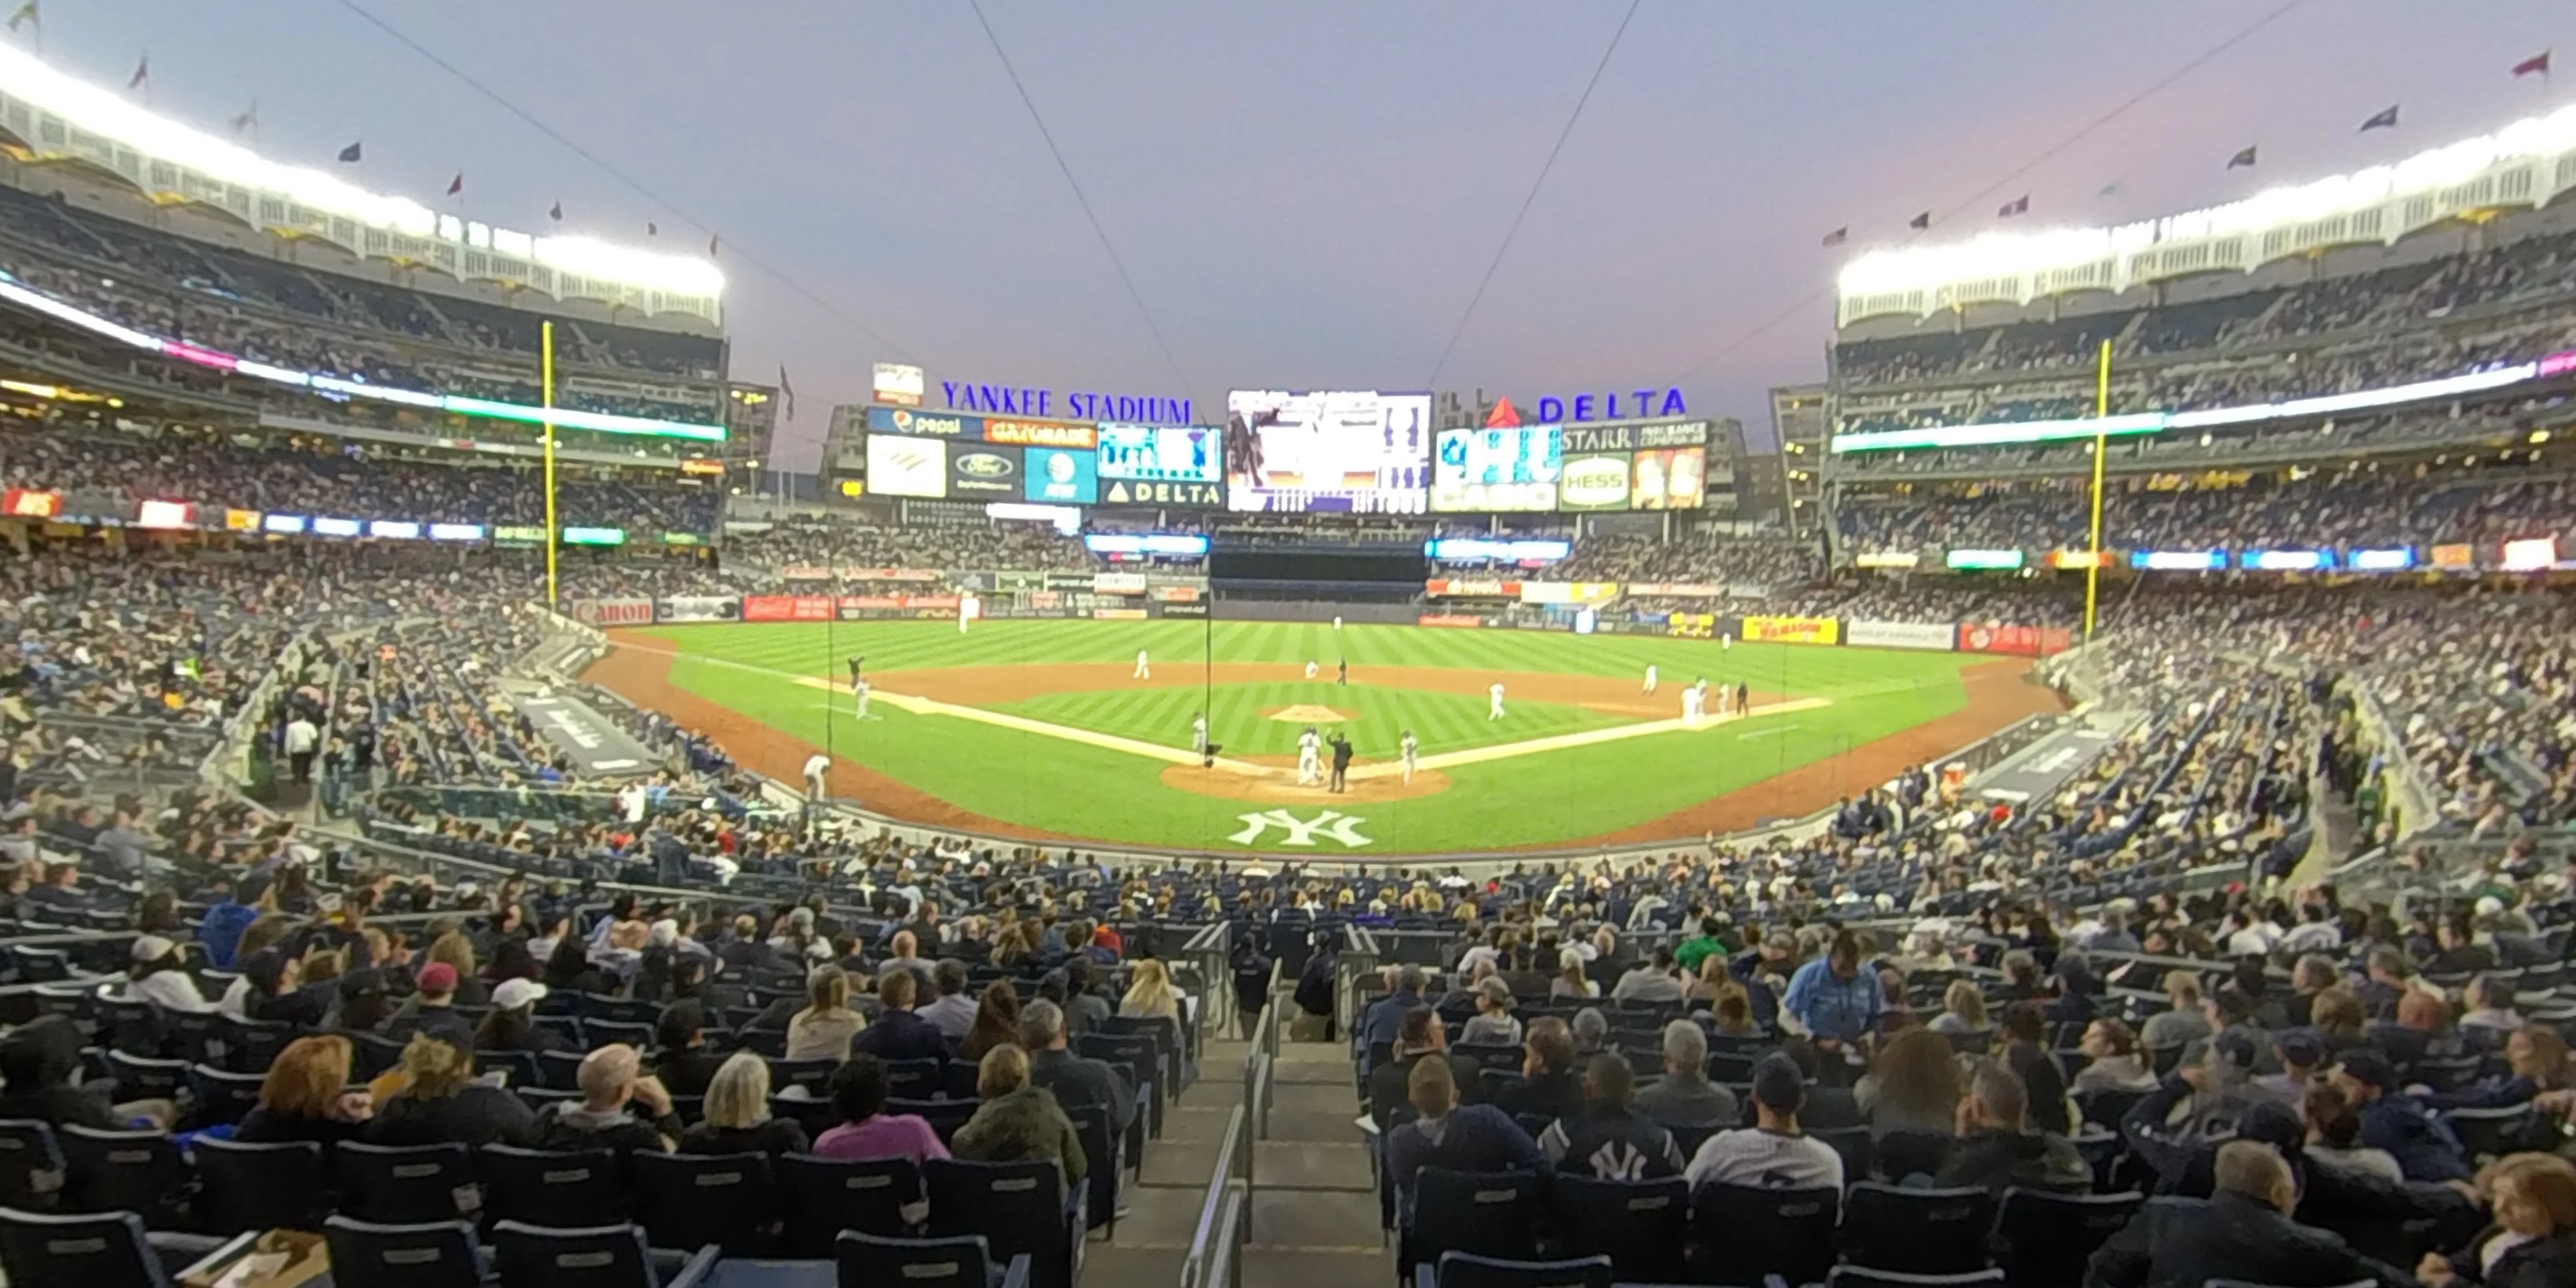 section 120a panoramic seat view  for baseball - yankee stadium